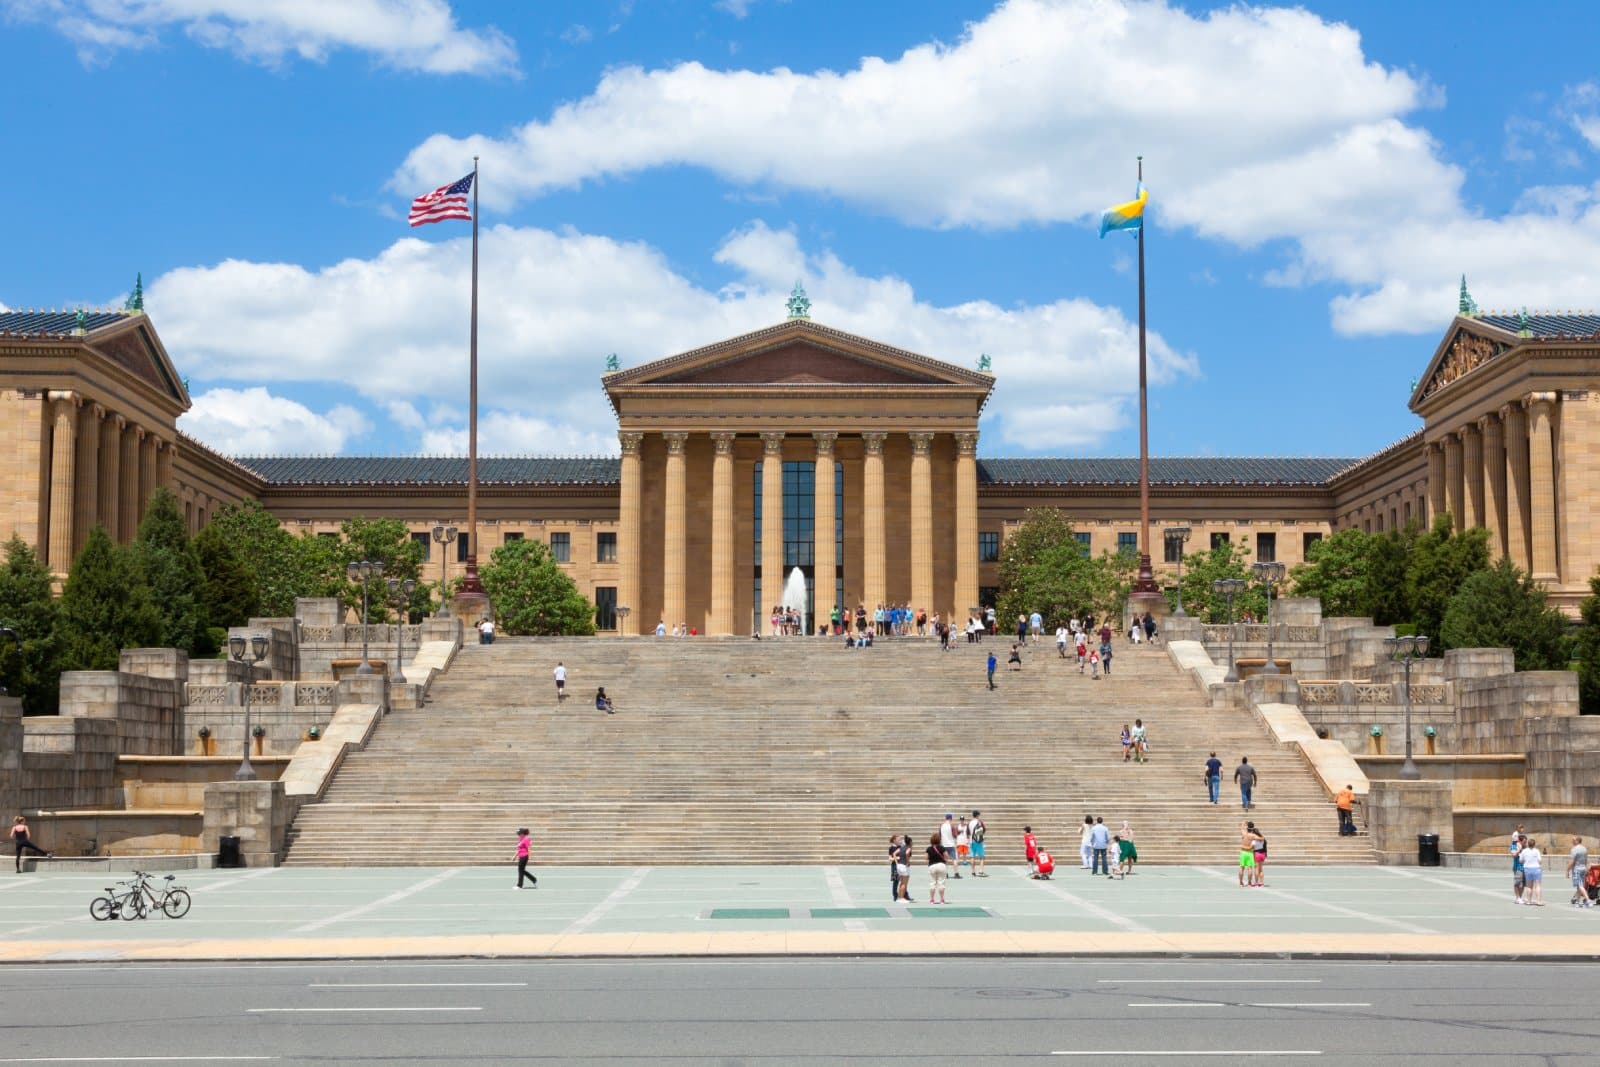 Image Credit: Shutterstock / Samuel Borges Photography <p><span>Nostalgia seems to influence Pennsylvania’s policies more than potential for the future, from historic sites to industrial museums.</span></p>